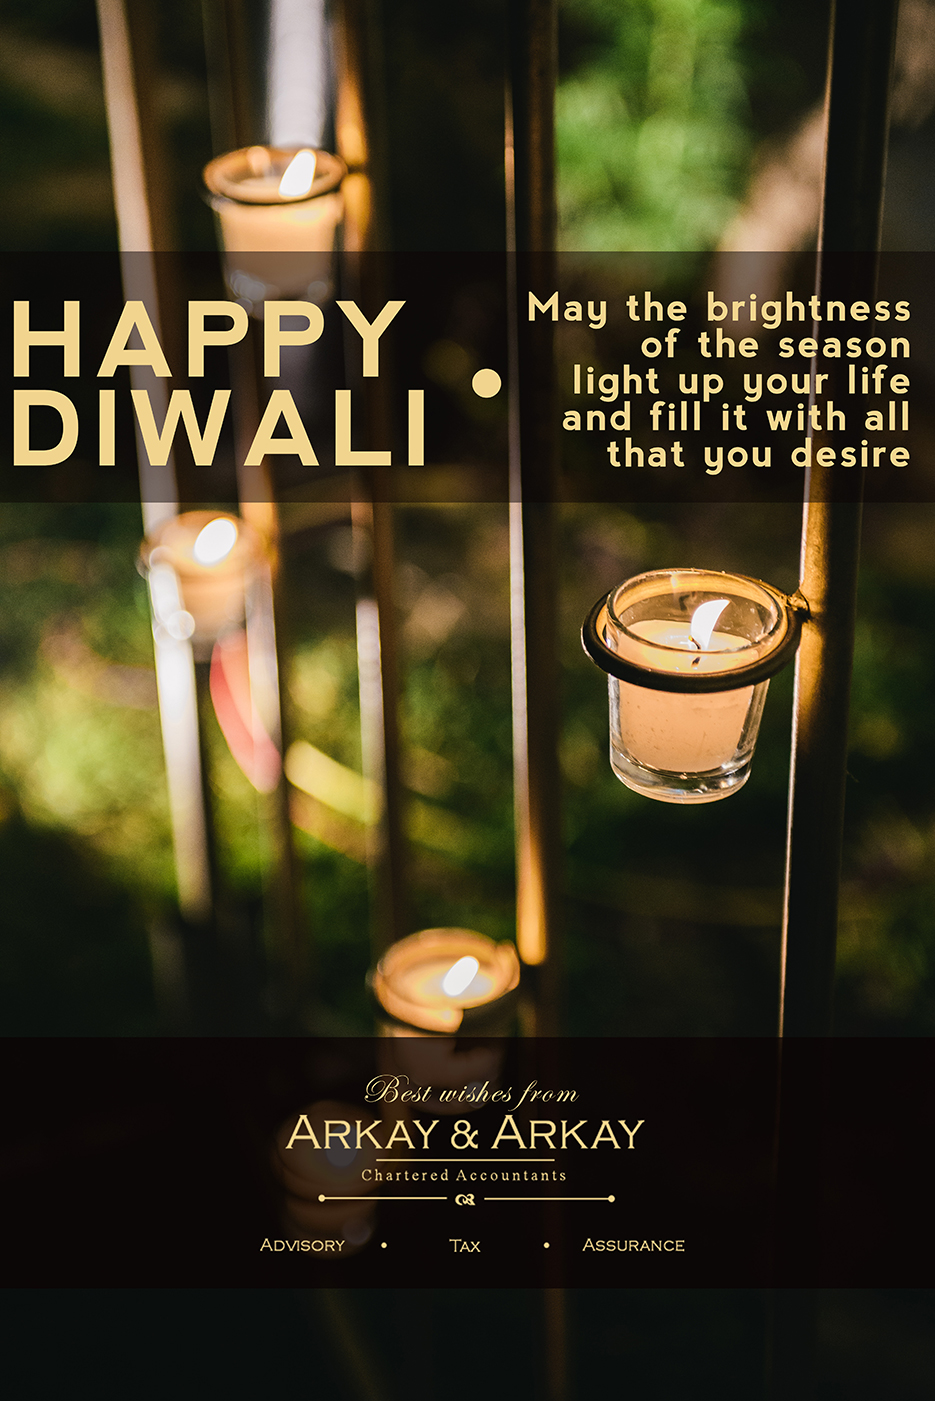 Happy Diwali 2012, Arkay and Arkay Chartered Accountants and Financial Advisors. Photography as captured by photographer Naina Redhu.